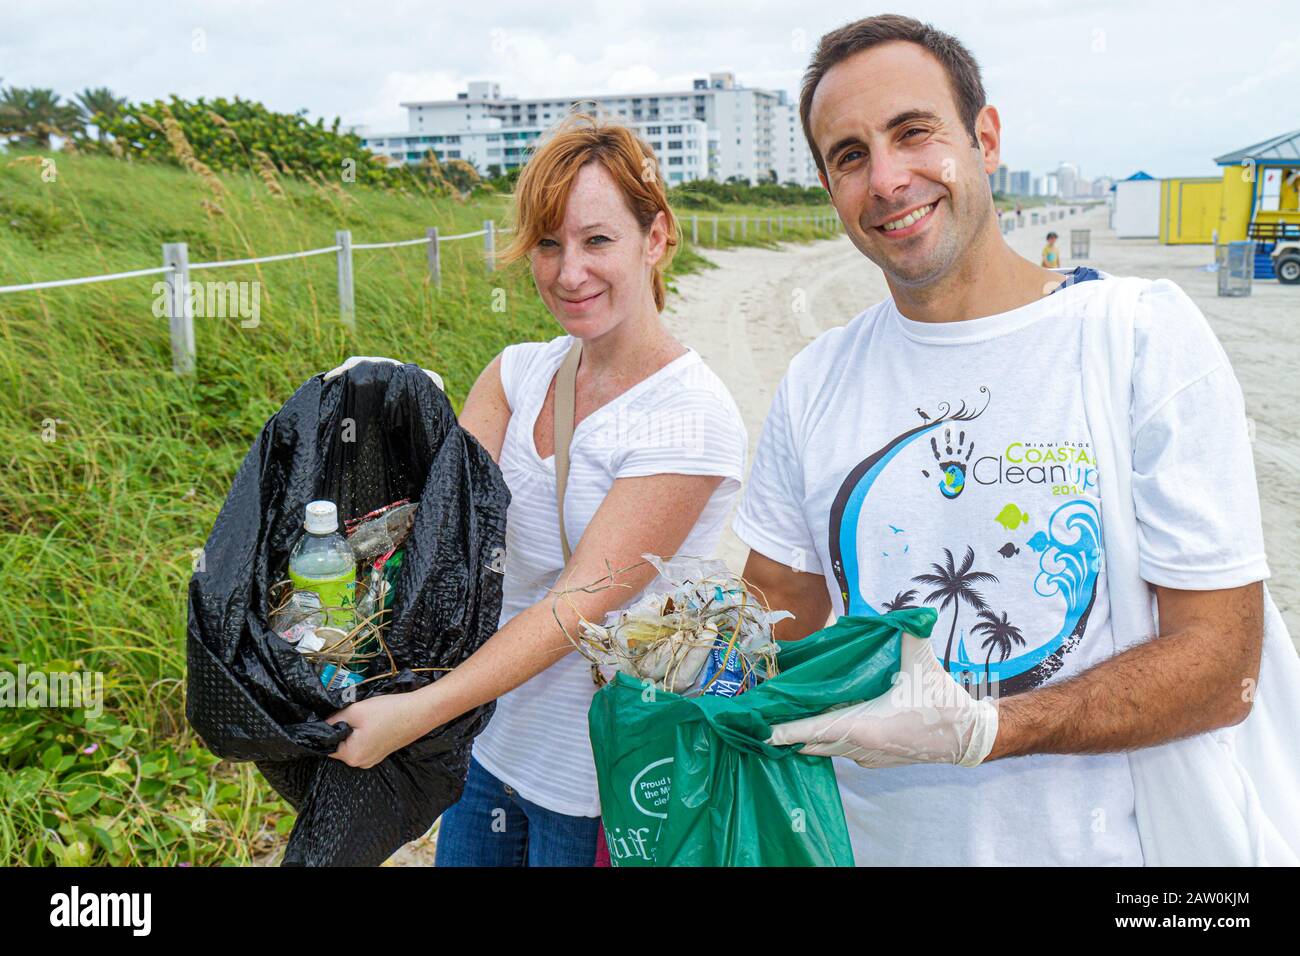 Miami Beach Florida,Coastal Cleanup Day,volunteer volunteers volunteering work worker workers,teamwork working together serving help lending,helping l Stock Photo